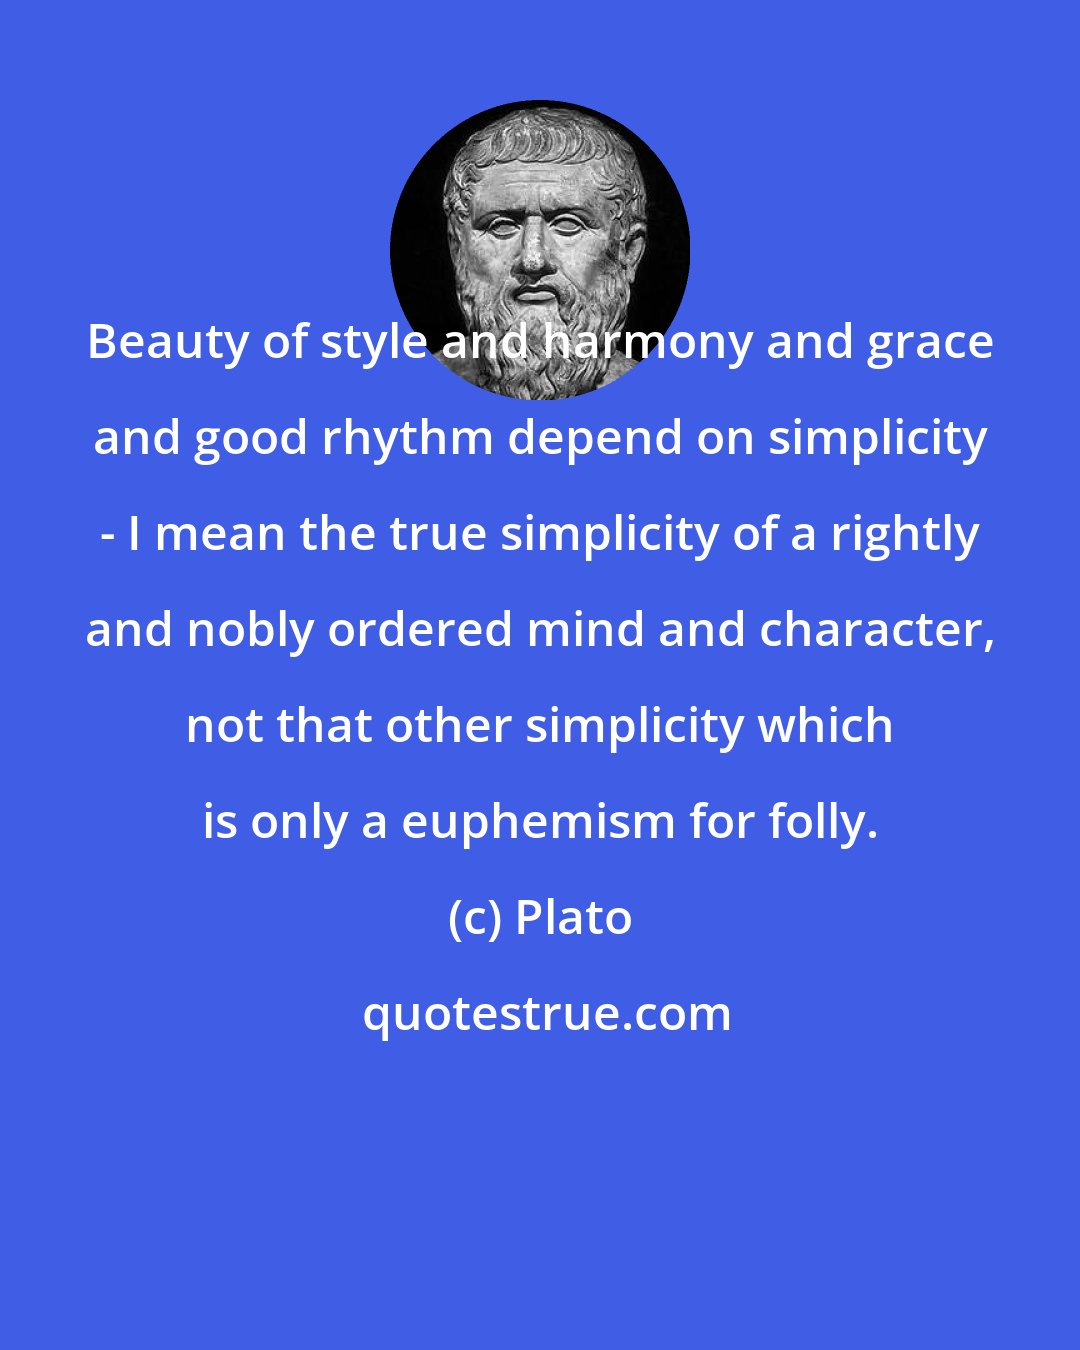 Plato: Beauty of style and harmony and grace and good rhythm depend on simplicity - I mean the true simplicity of a rightly and nobly ordered mind and character, not that other simplicity which is only a euphemism for folly.